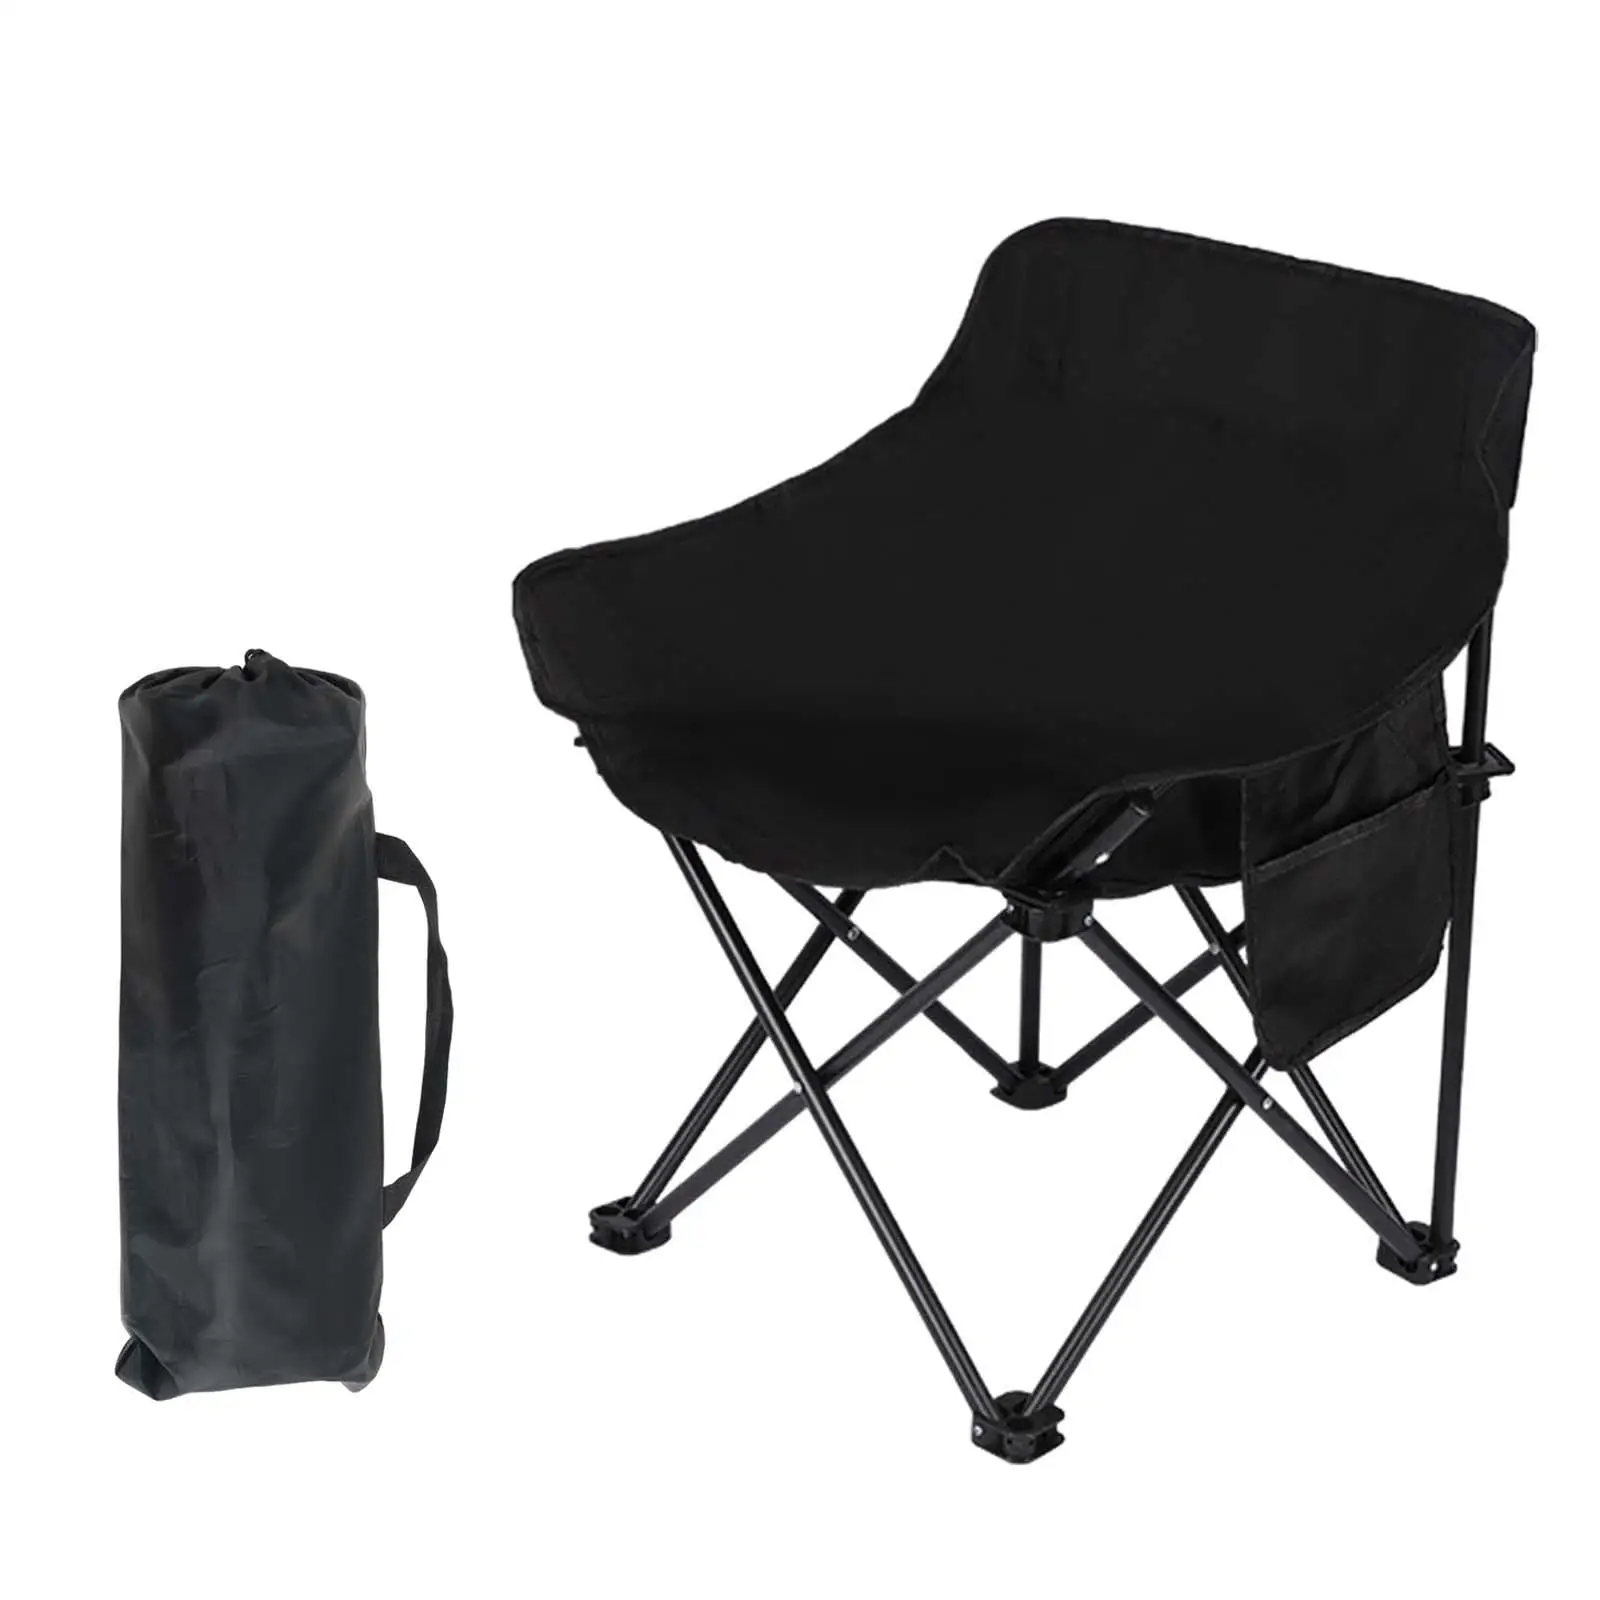 Folding Camping Chair Portable Folding Chair Collapsible Anti Slip Beach Chair Outdoor Moon Chair for Picnics Barbecue Hiking